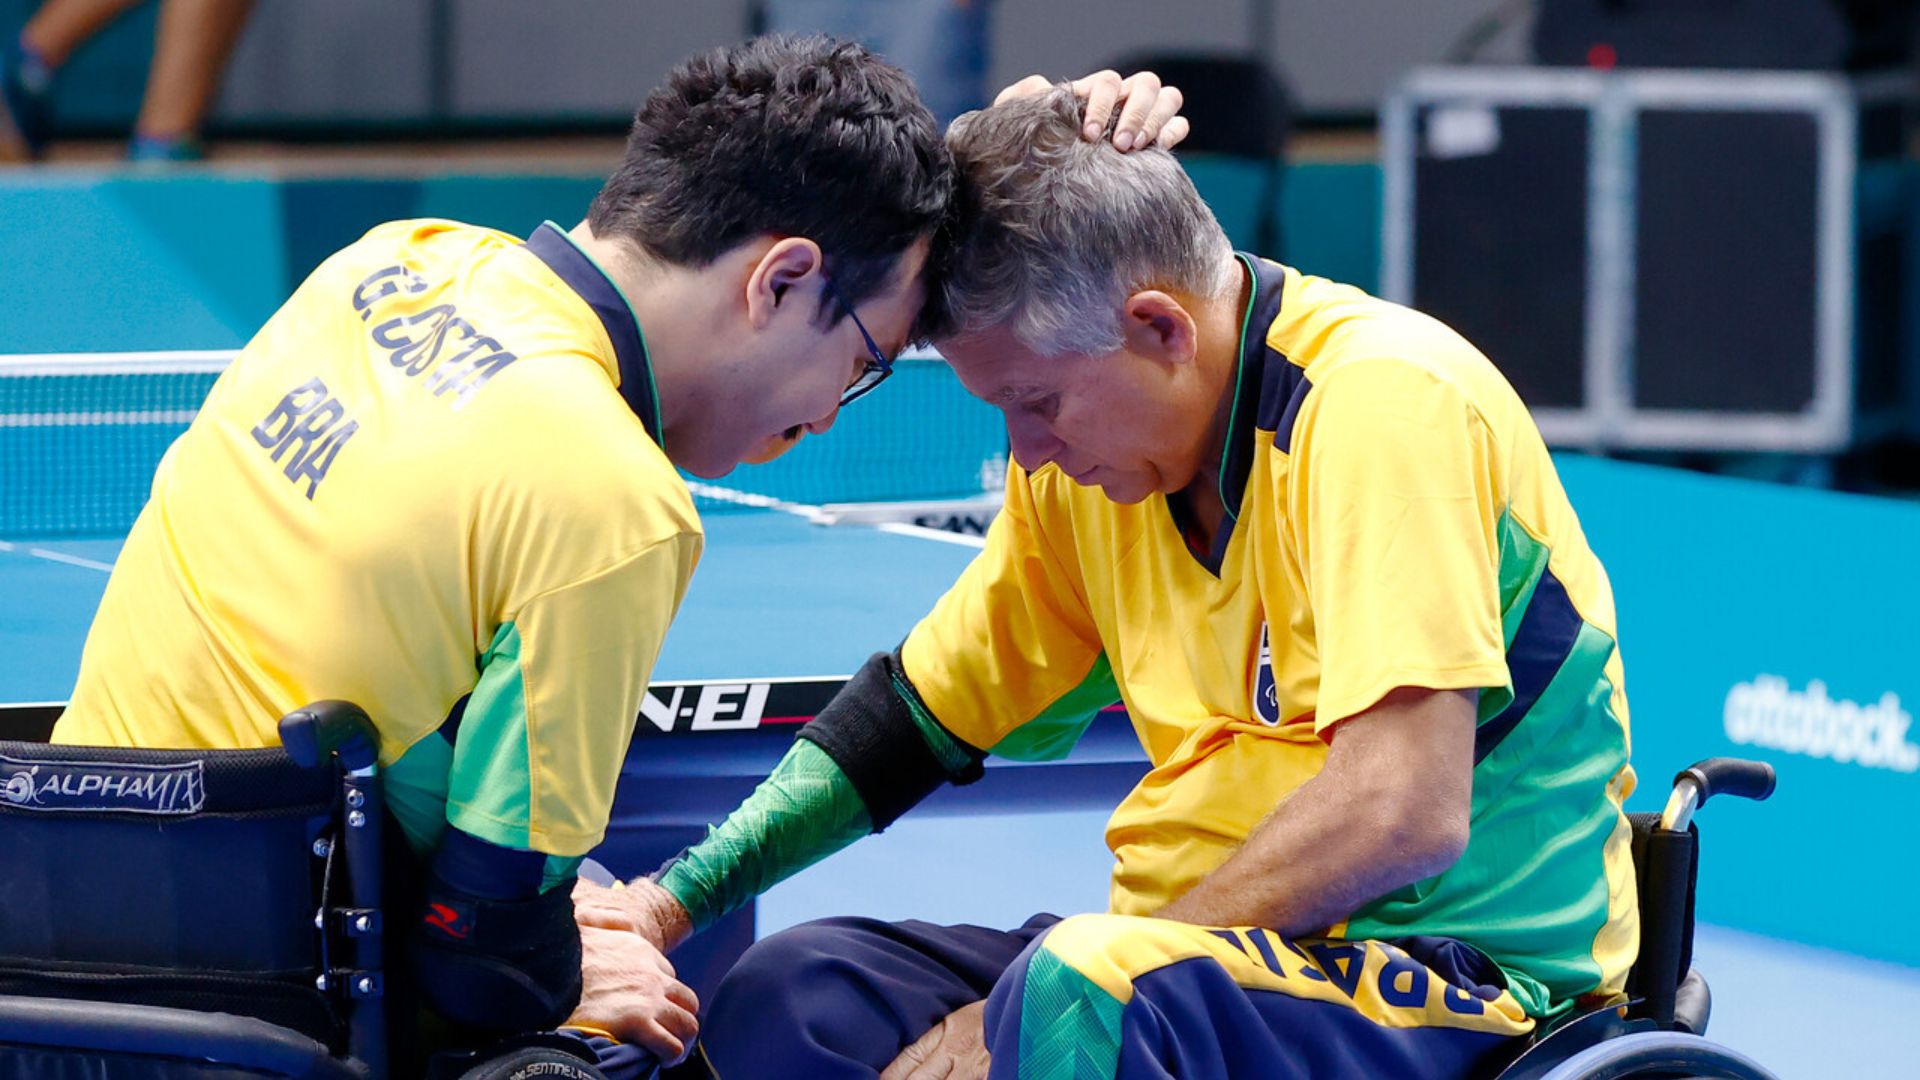 Brazilian Achieves Legendary Record at Parapan American Games